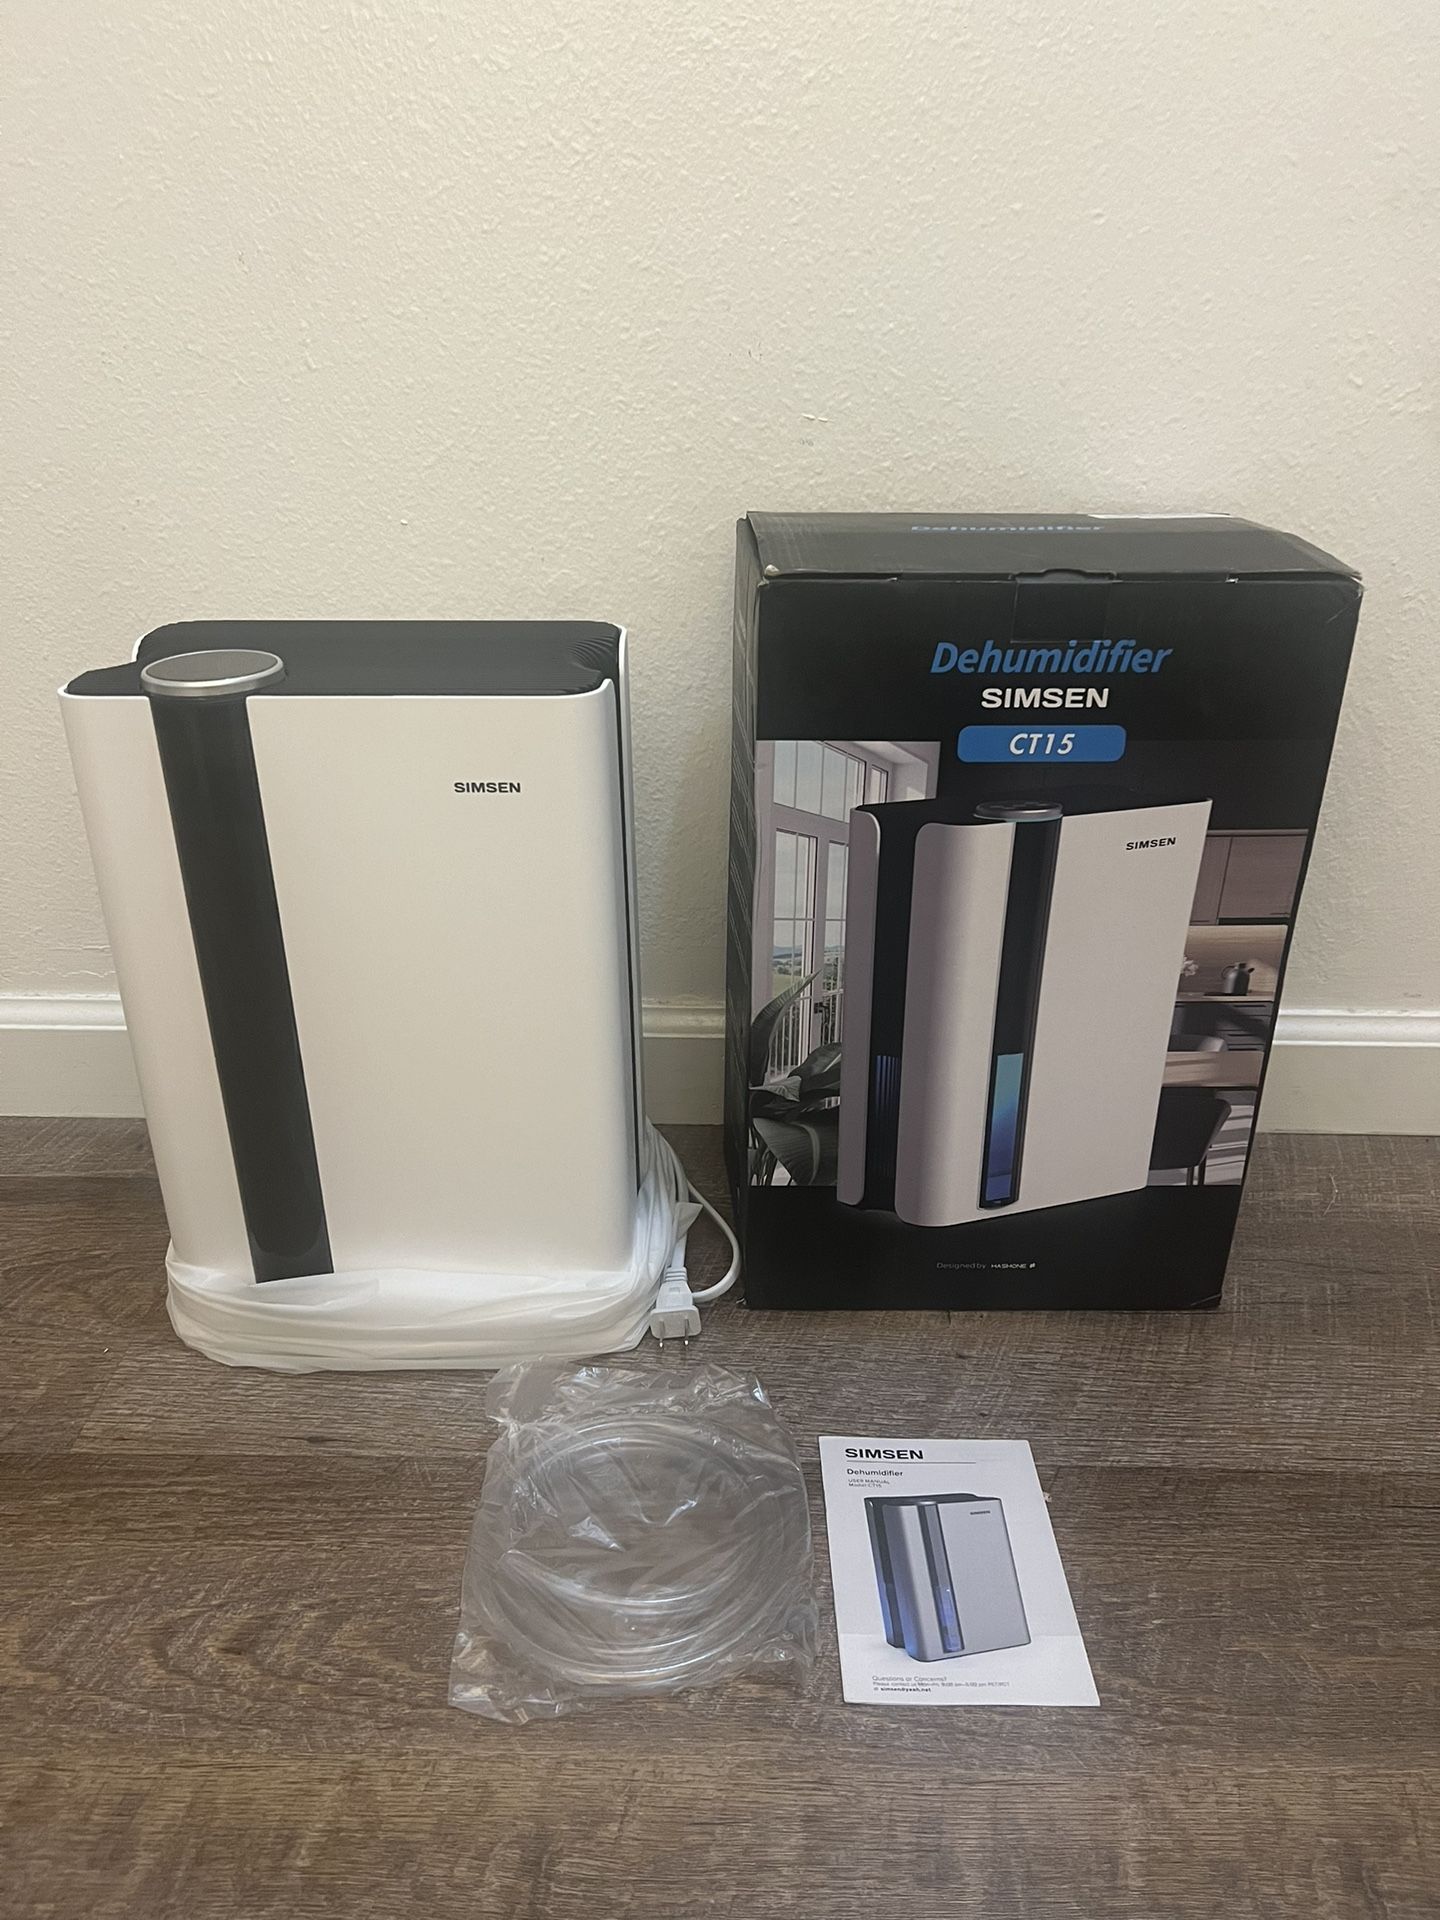 Dehumidifier with Reusable Filter and Ionizer, SIMSEN CT15, 800 sq ft, 95oz, Quiet with Drain Hose (New)